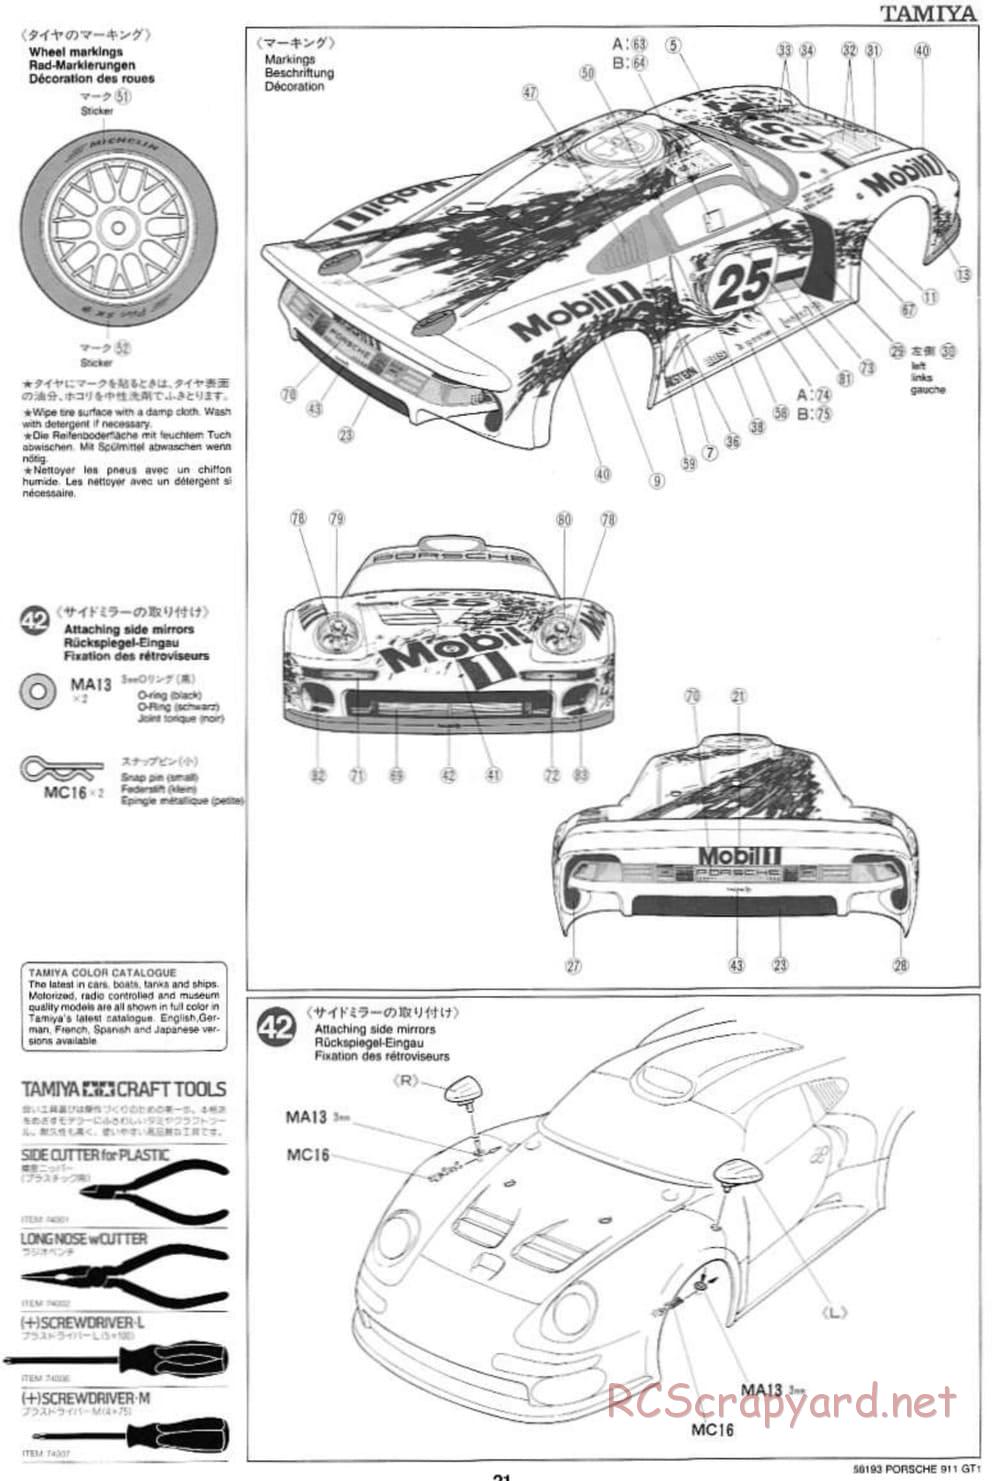 Tamiya - Porsche 911 GT1 - TA-03RS Chassis - Manual - Page 21